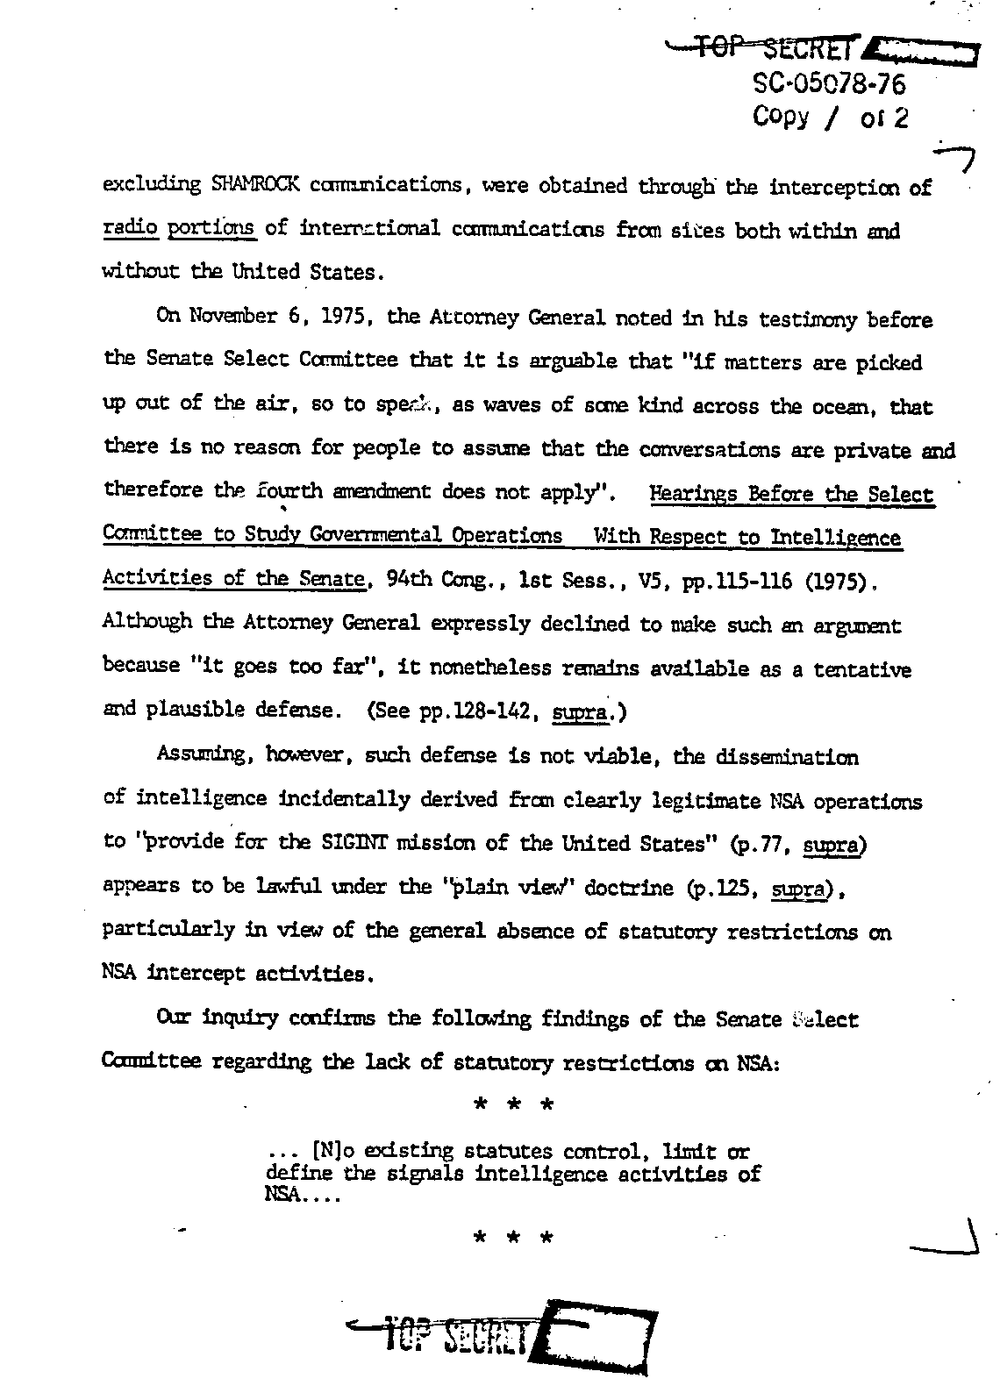 Page 169 from Report on Inquiry Into CIA Related Electronic Surveillance Activities